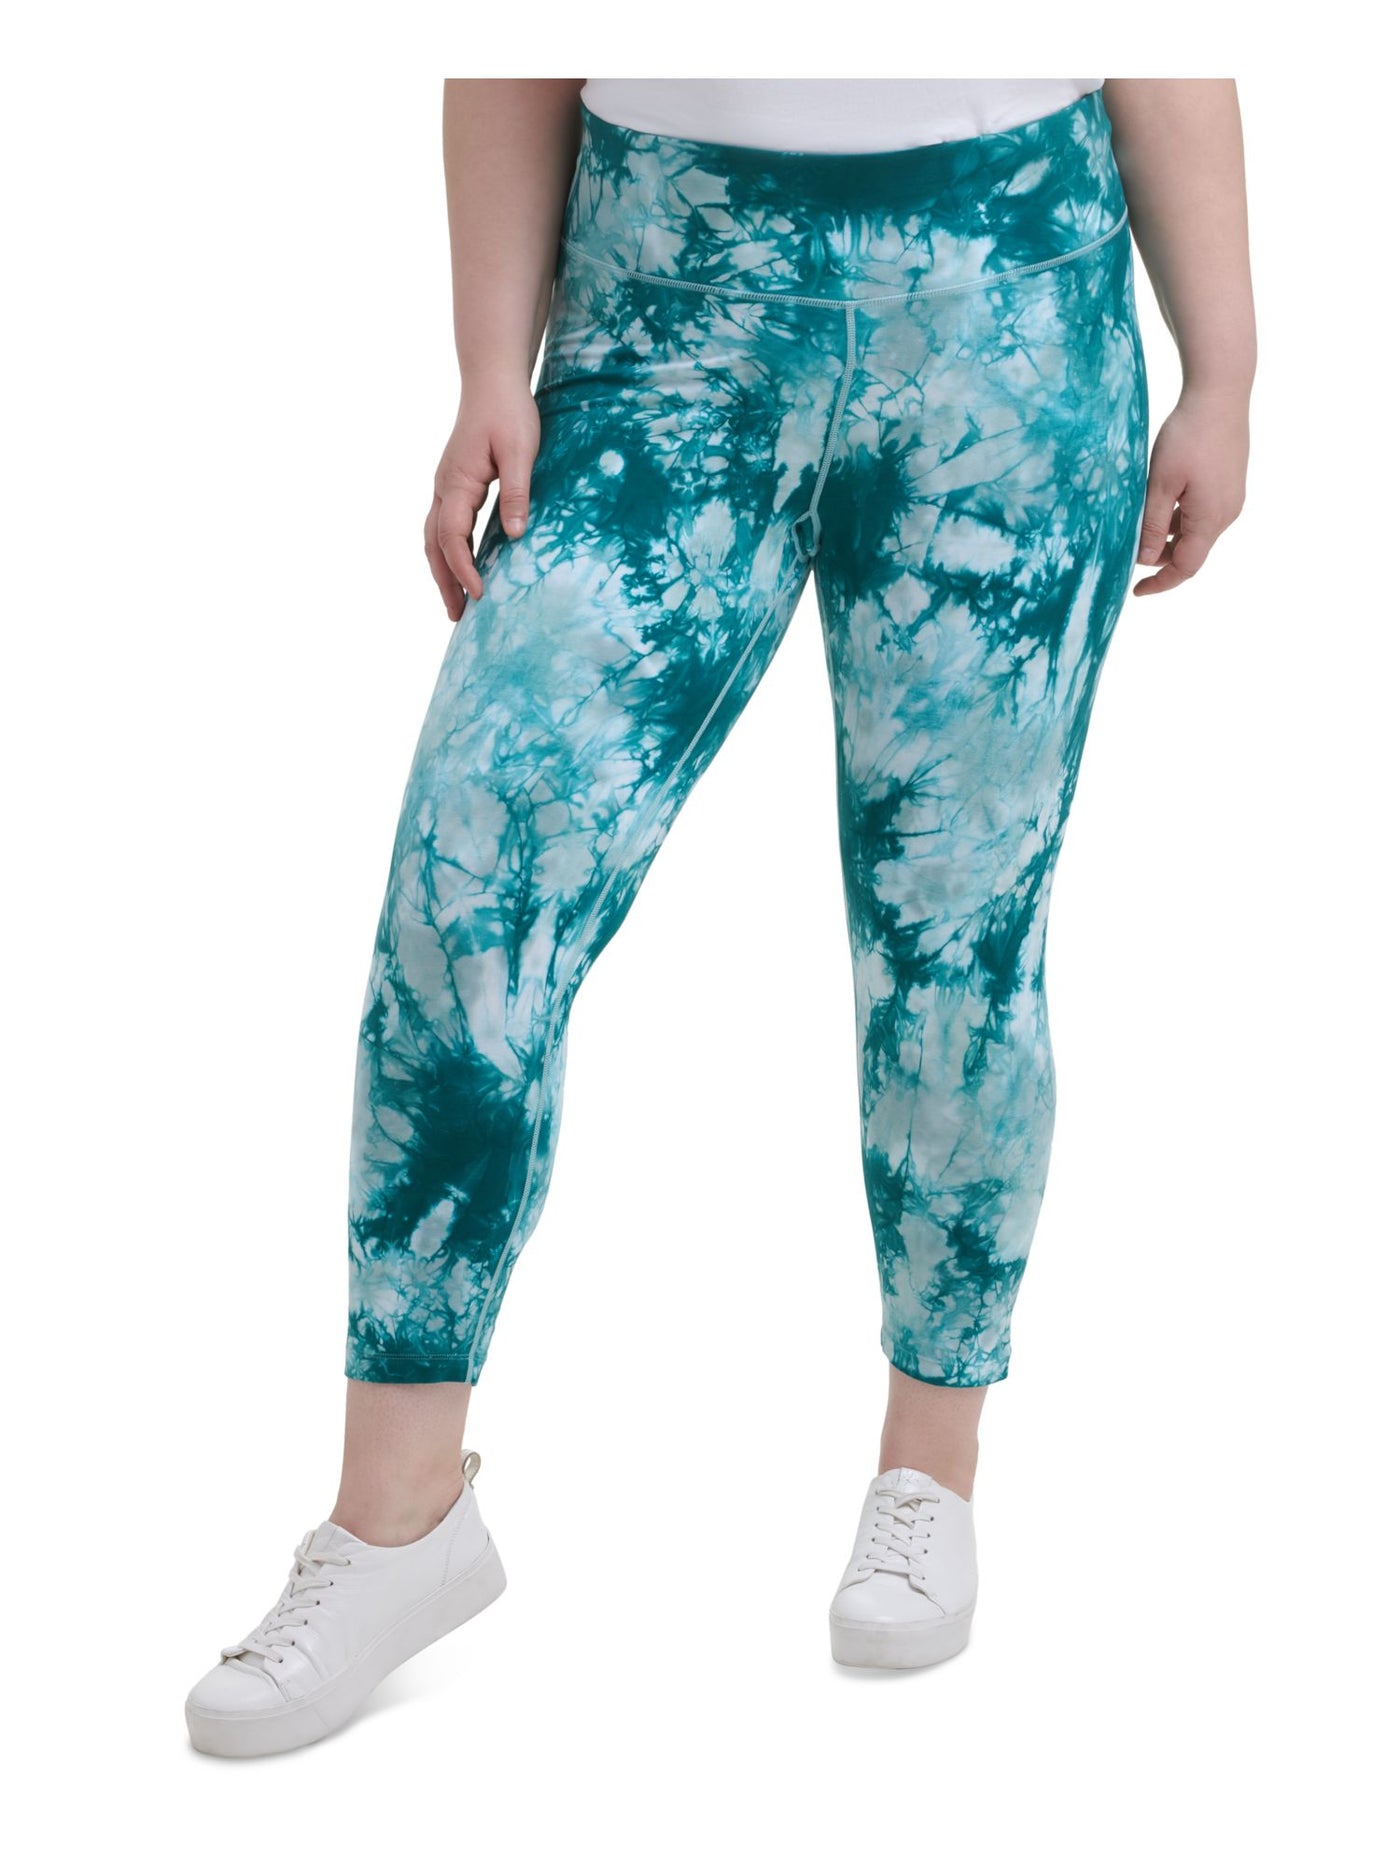 CALVIN KLEIN PERFORMANCE Womens Teal Stretch Pocketed Pull-on Style Tie Dye Active Wear Skinny Leggings Plus 2X